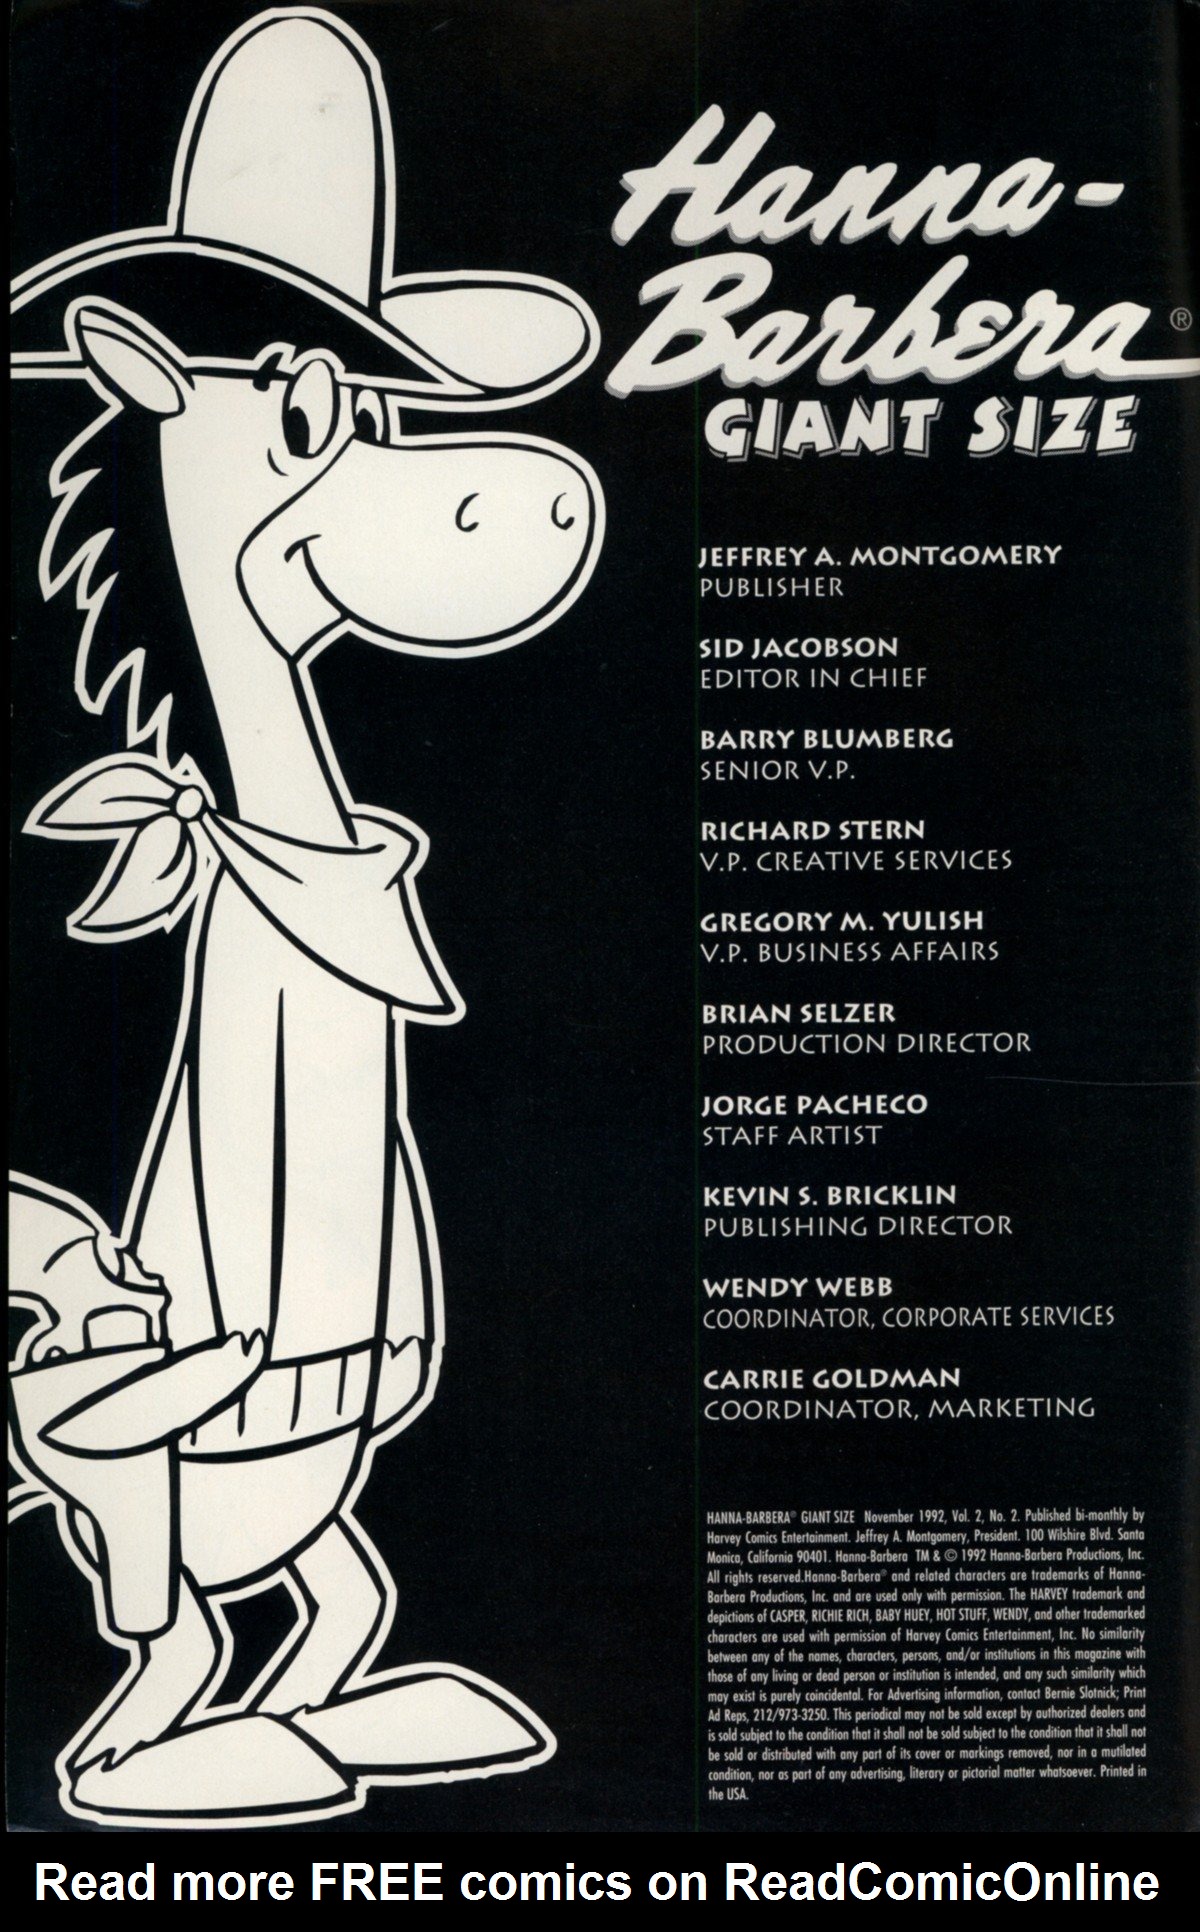 Read online Hanna Barbera Giant Size comic -  Issue #2 - 2